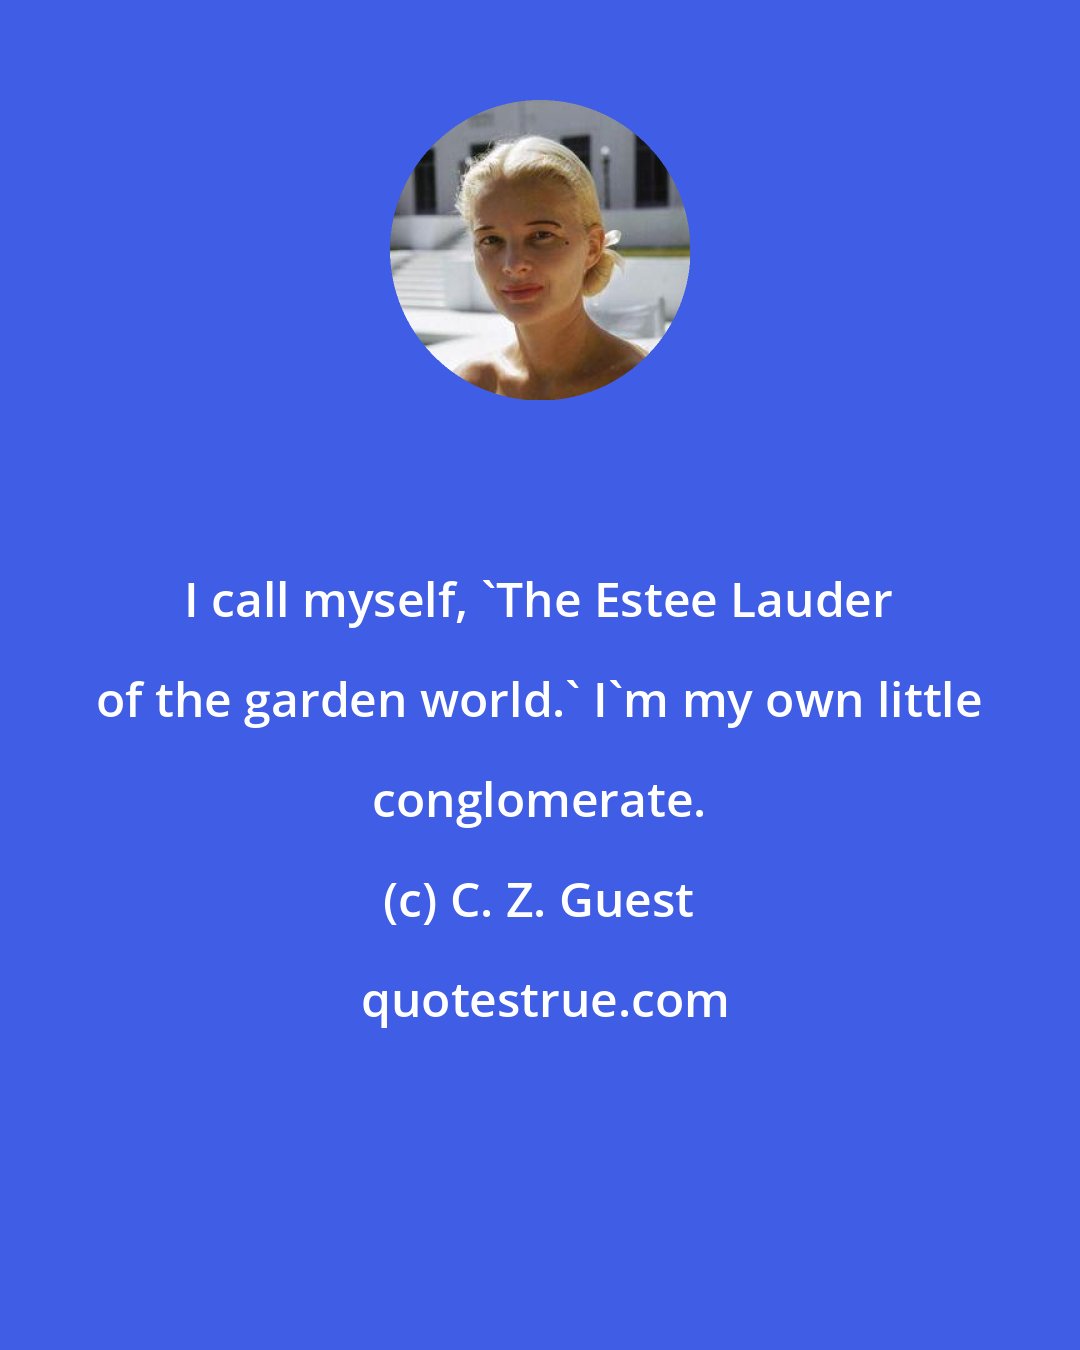 C. Z. Guest: I call myself, 'The Estee Lauder of the garden world.' I'm my own little conglomerate.